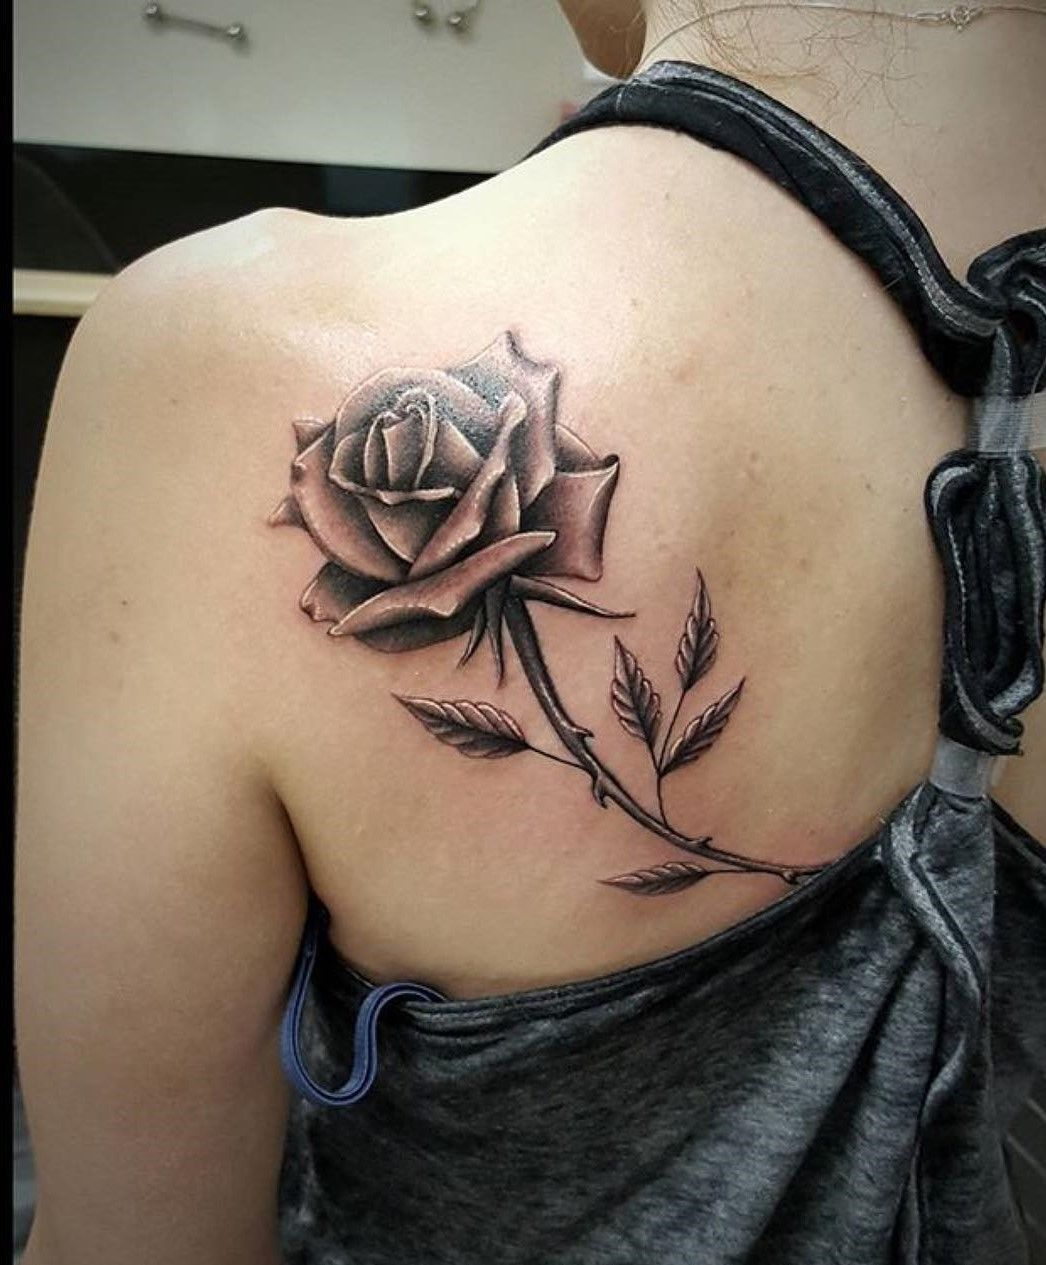 Rose Tattoo Shoulder Back Design The Most Lovely And Beautiful Ever regarding dimensions 1046 X 1265